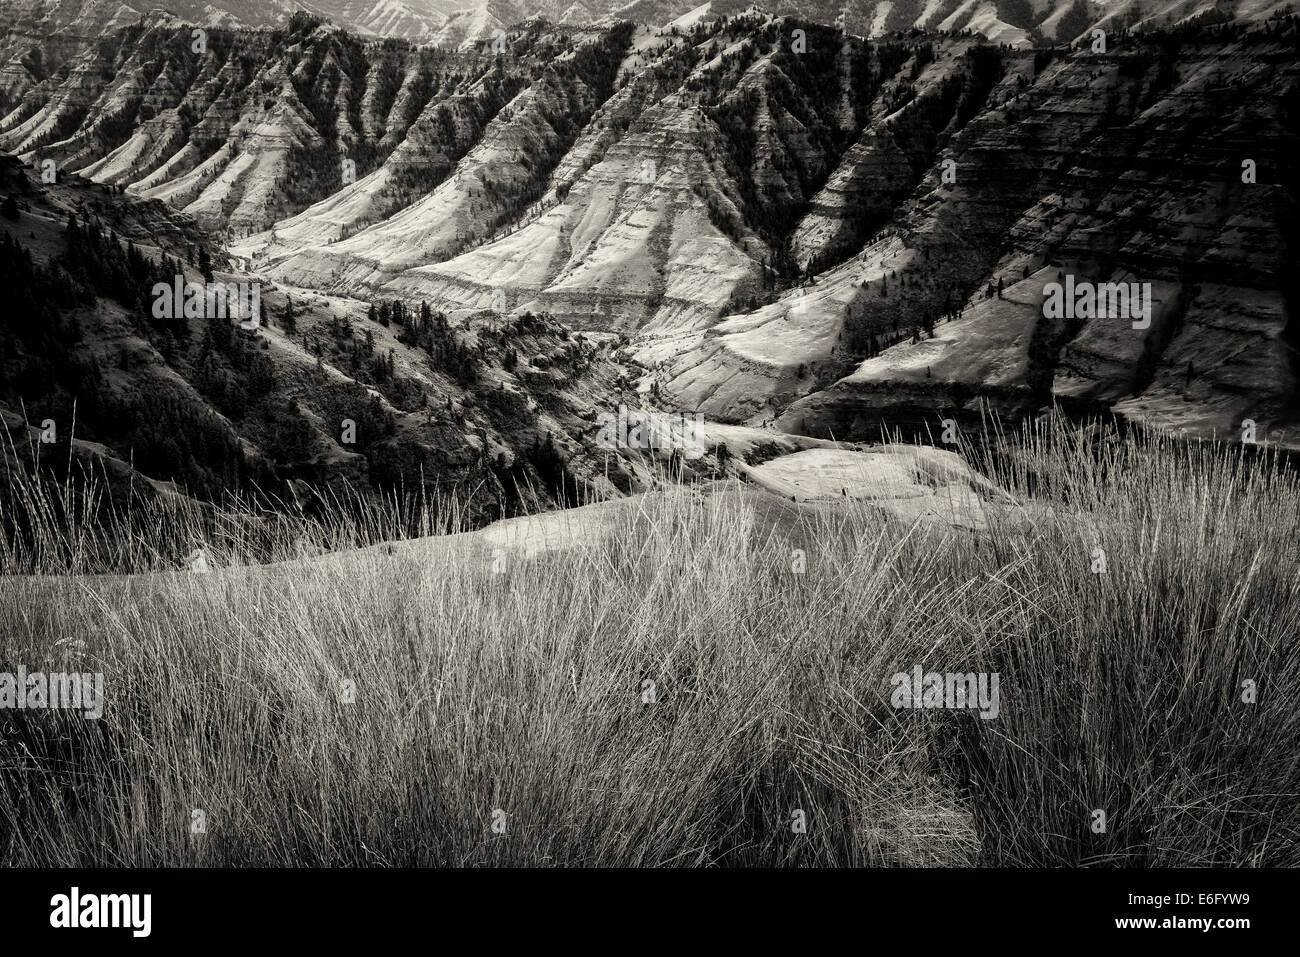 Herbes et Imnaha Canyon. Hells Canyon National Recreation Area, New York Banque D'Images